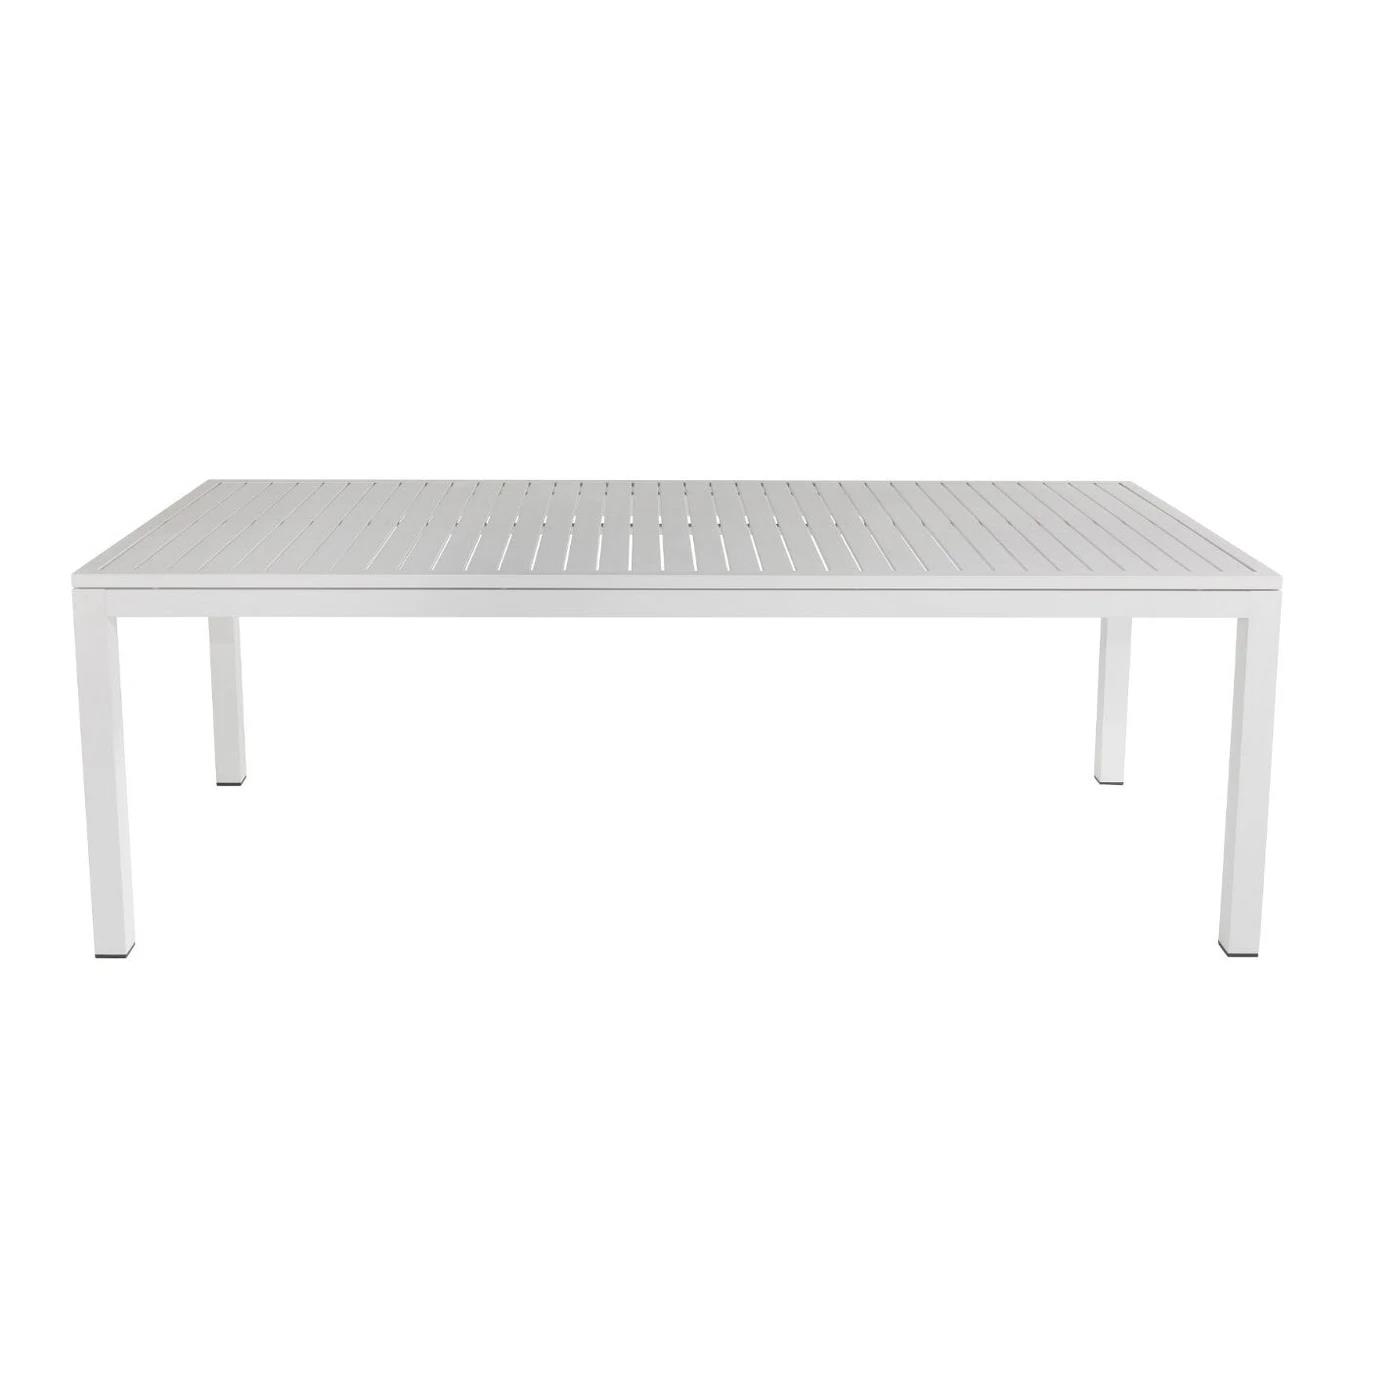 Outdoor Dining Table River Sand W1800 x D920mm